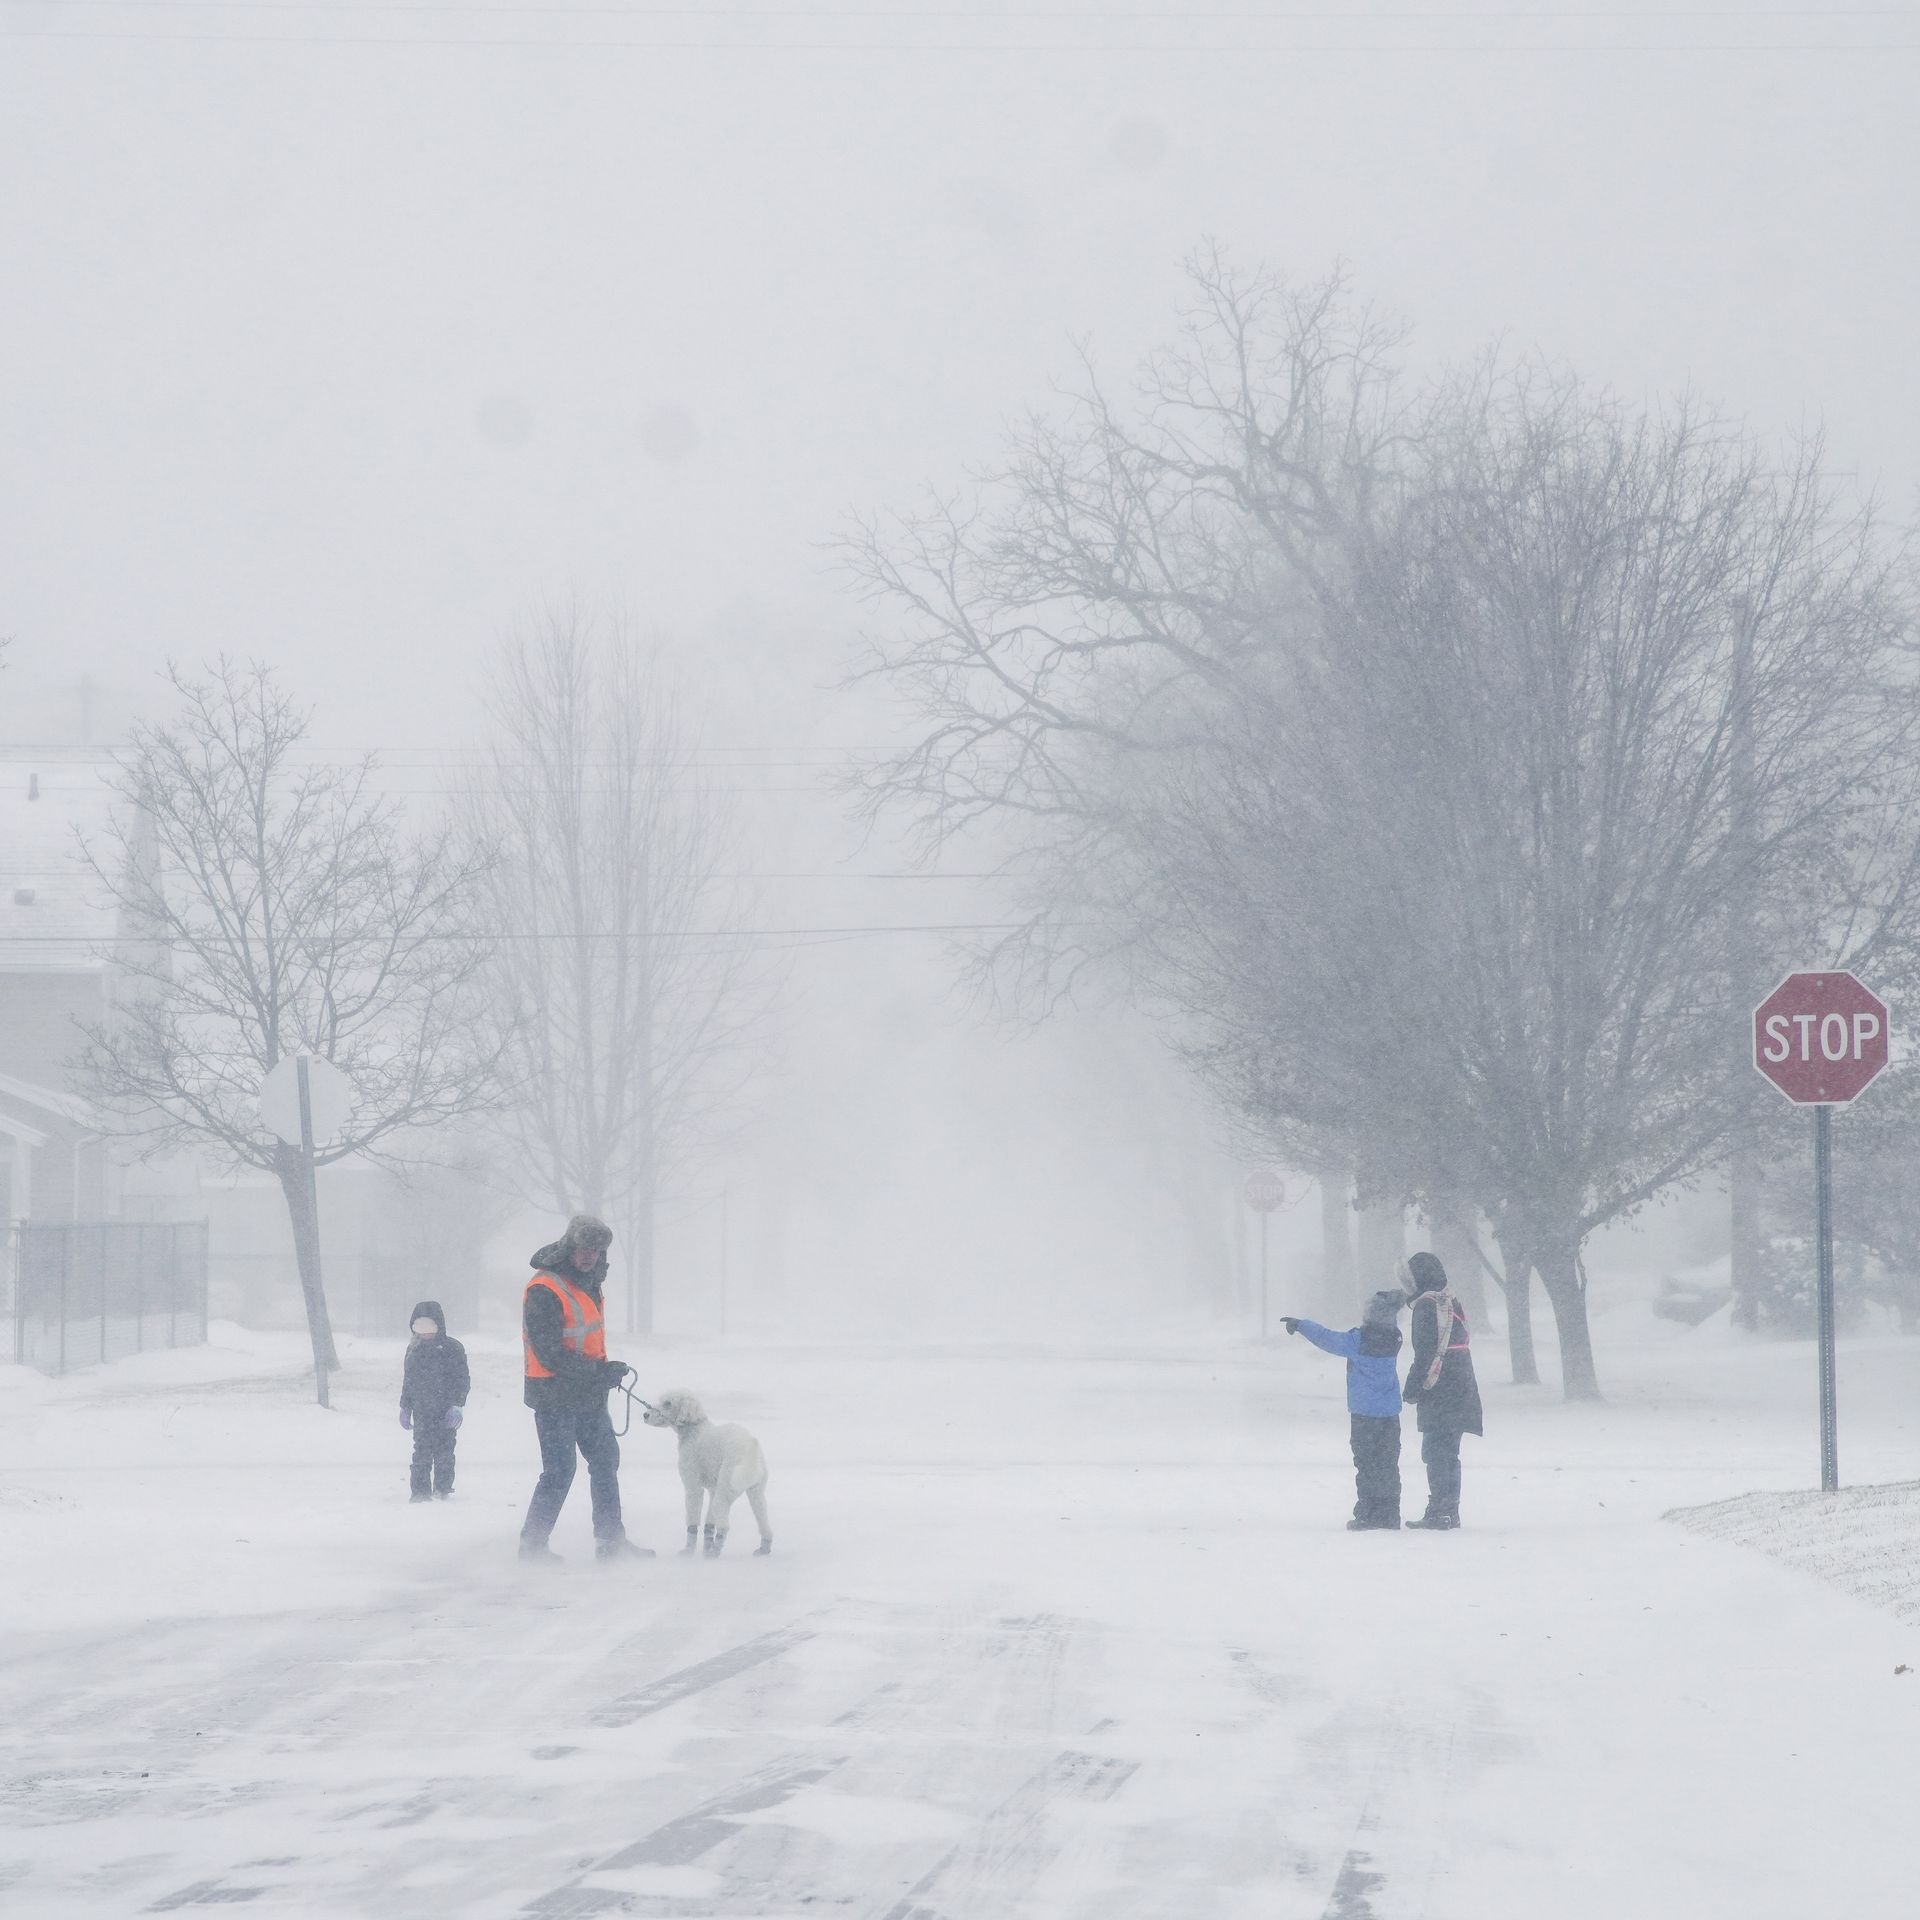 Winter storm 2022: Power outages, travel delays, blizzards hammer U.S.